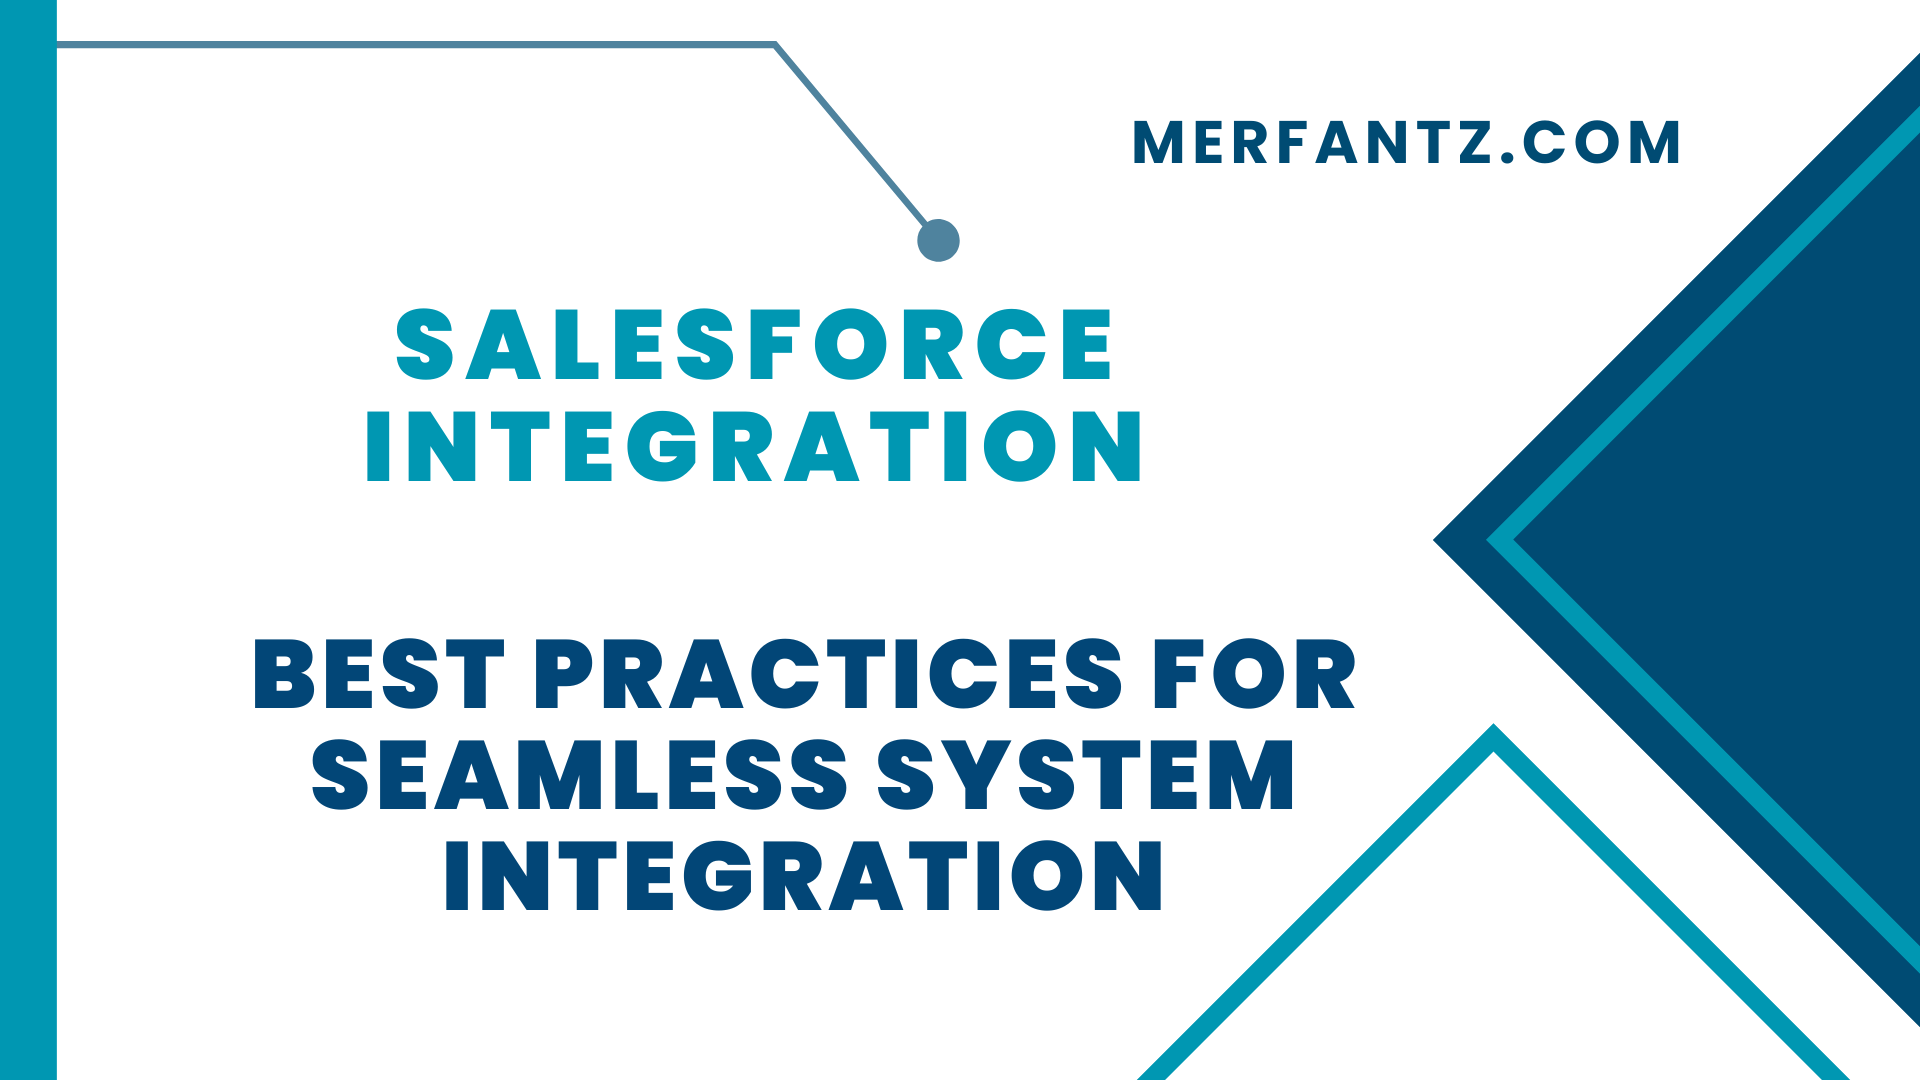 Best Practices for Seamless System Integration